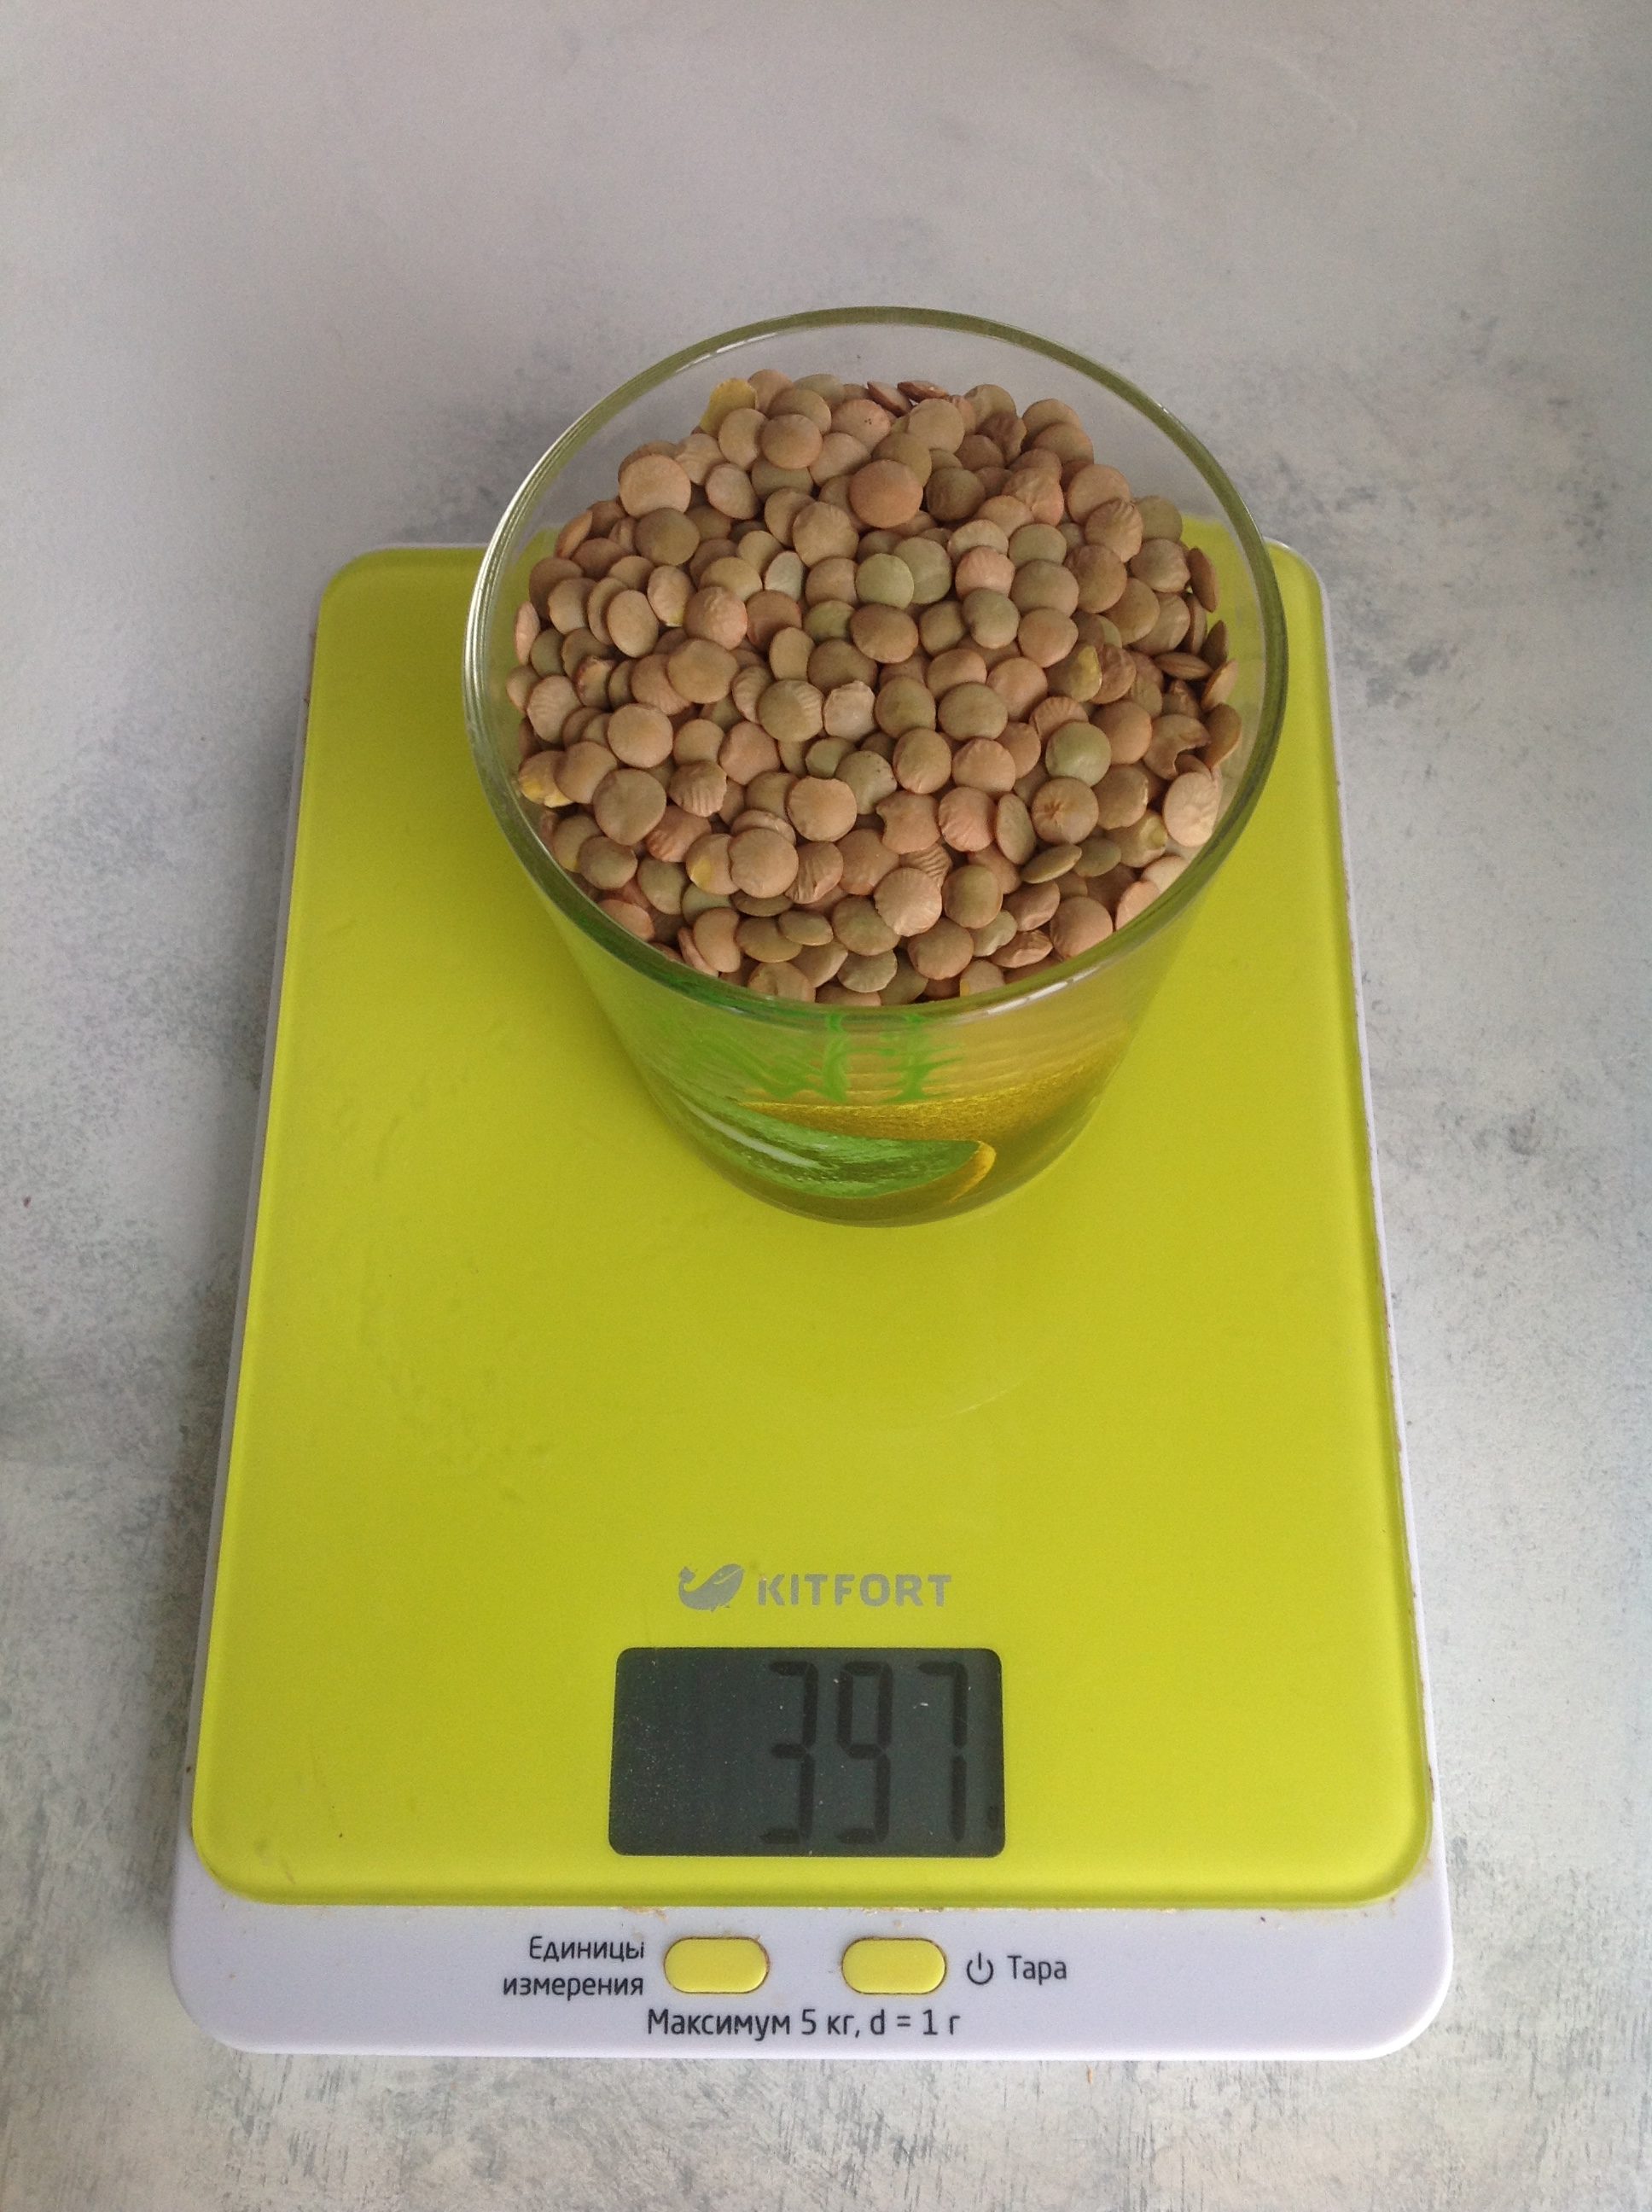 How much does dry green lentils weigh in a 250 ml glass?